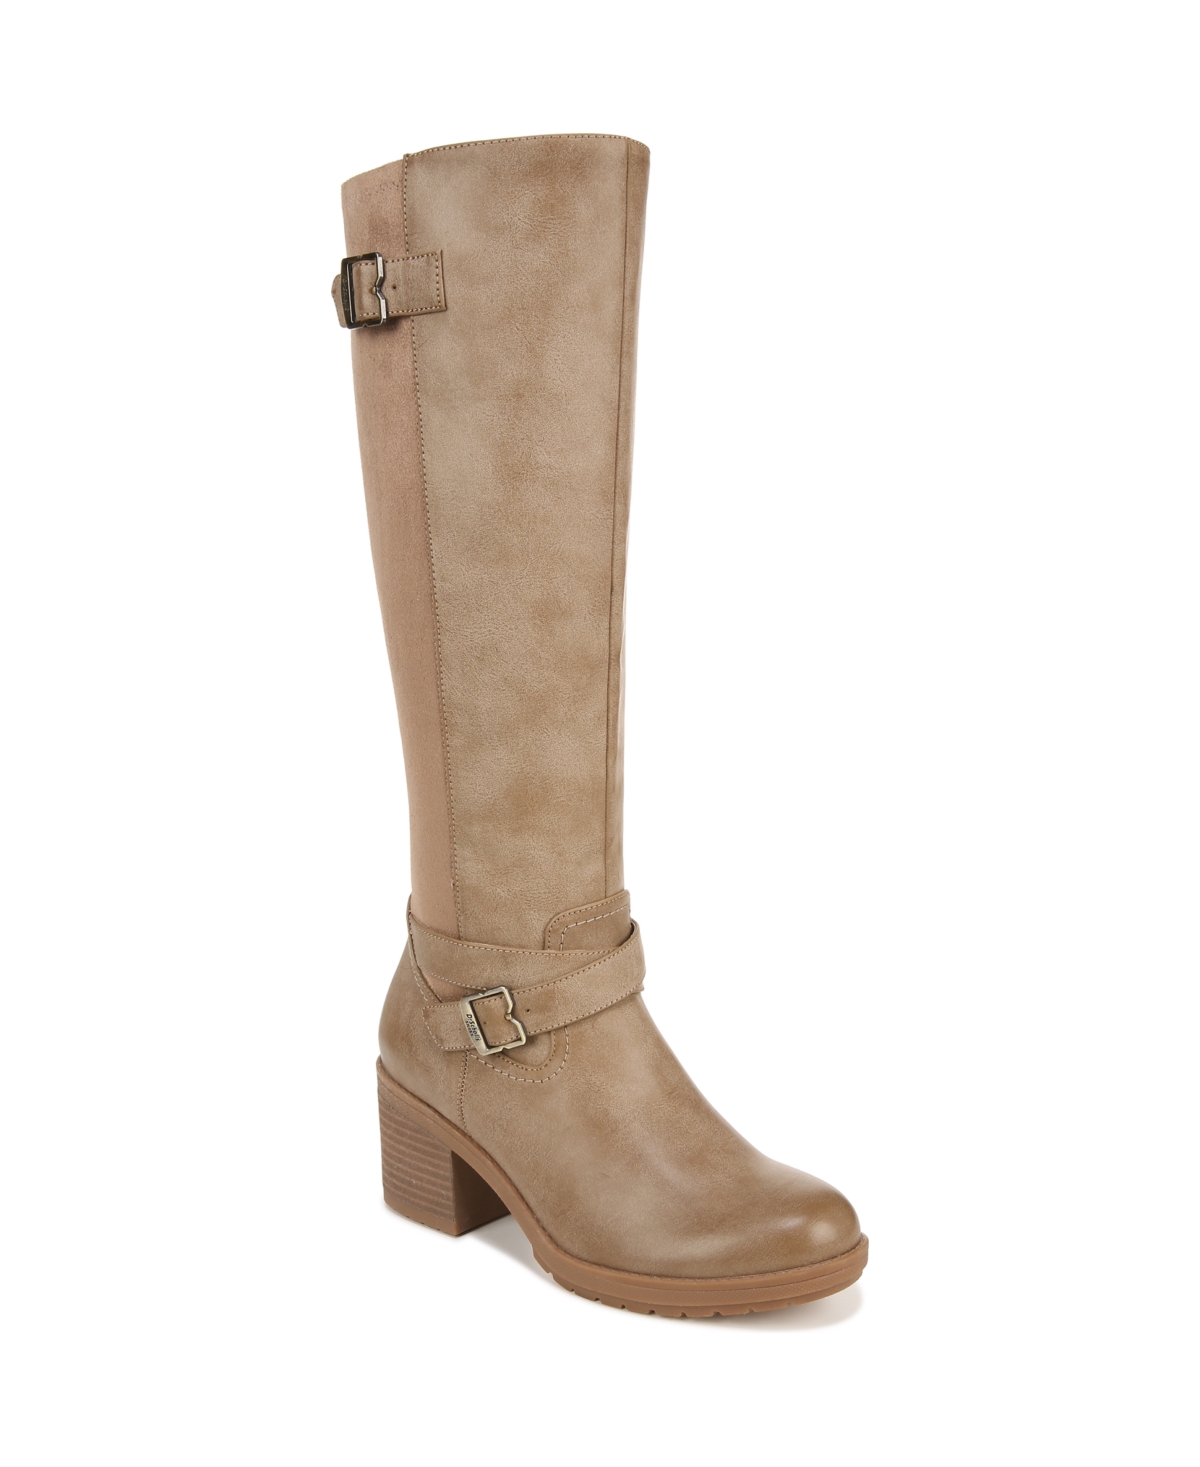 Women's Prairie High Shaft Boots - Taupe Faux Leather/Fabric